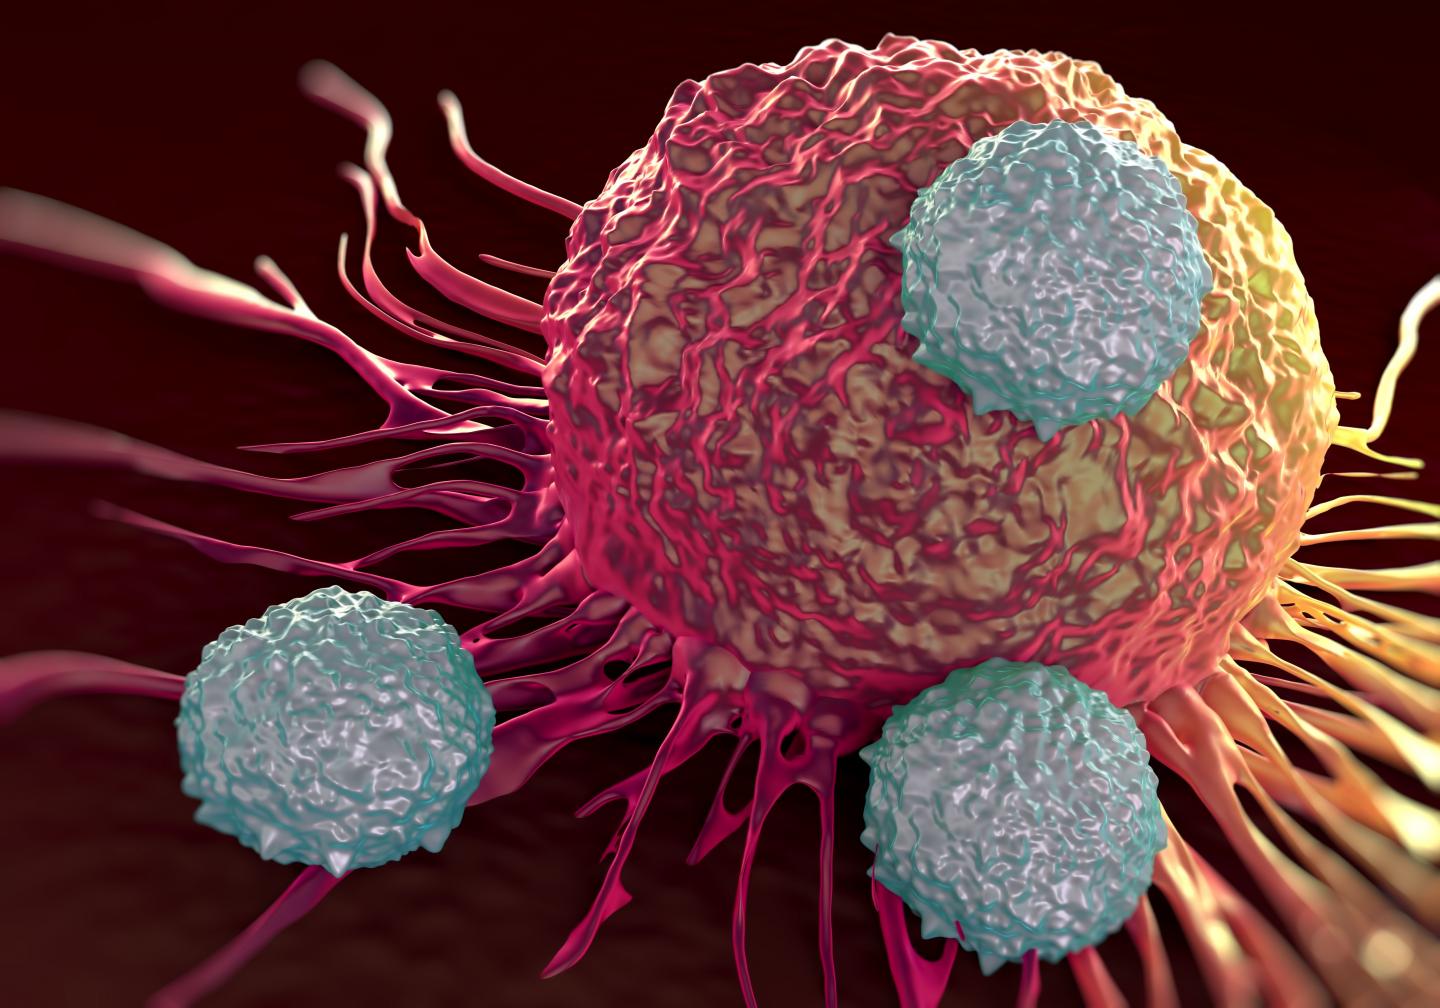 T cells Attacking Cancer Cells.